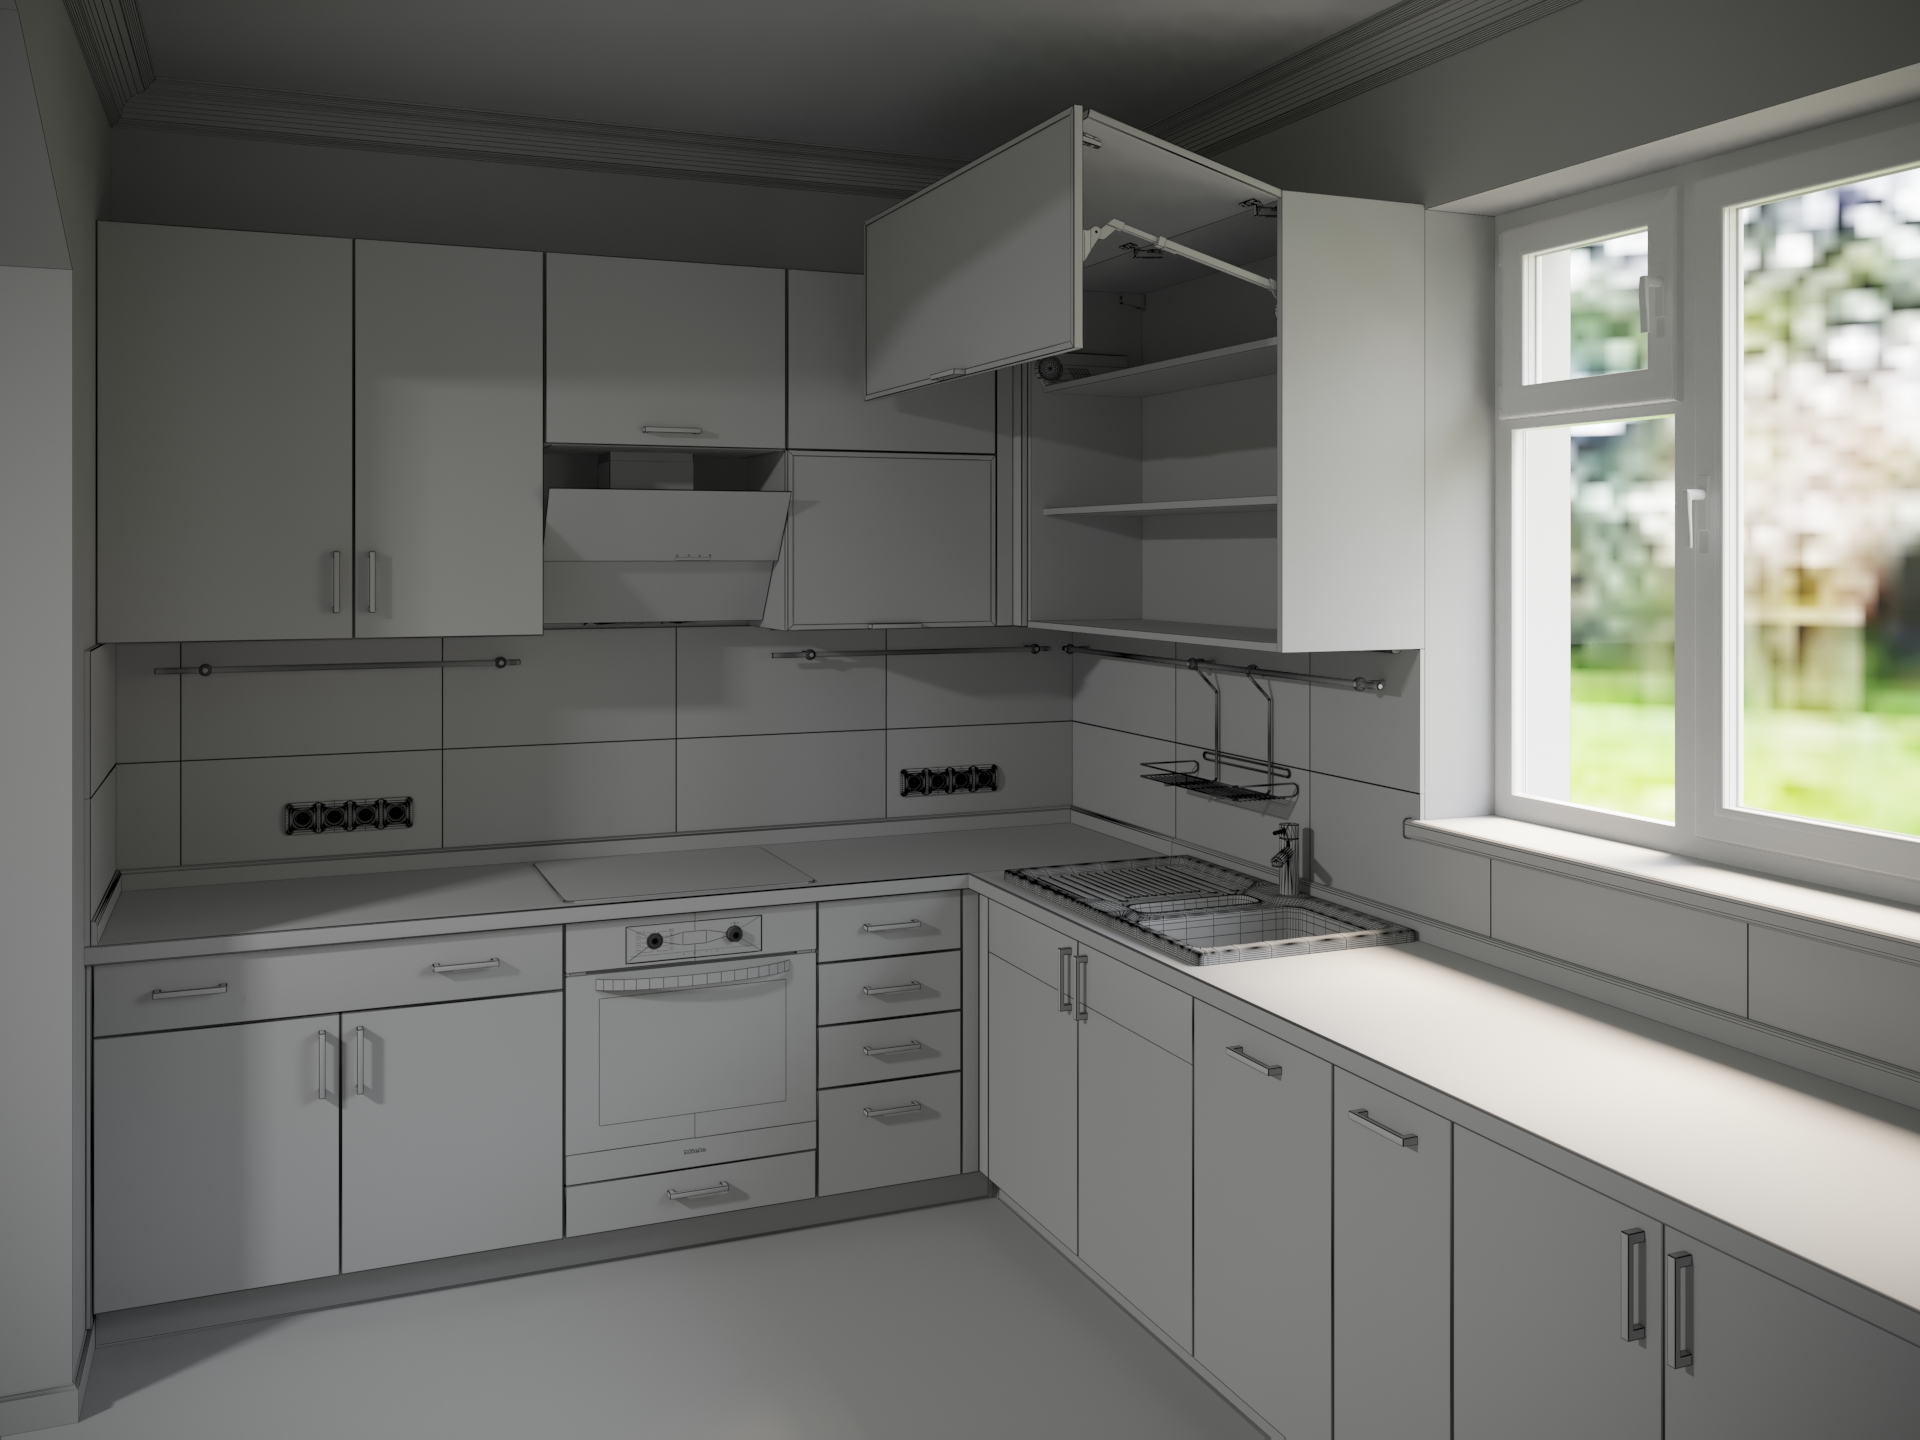 visualization of a kitchen in 3d max corona render image